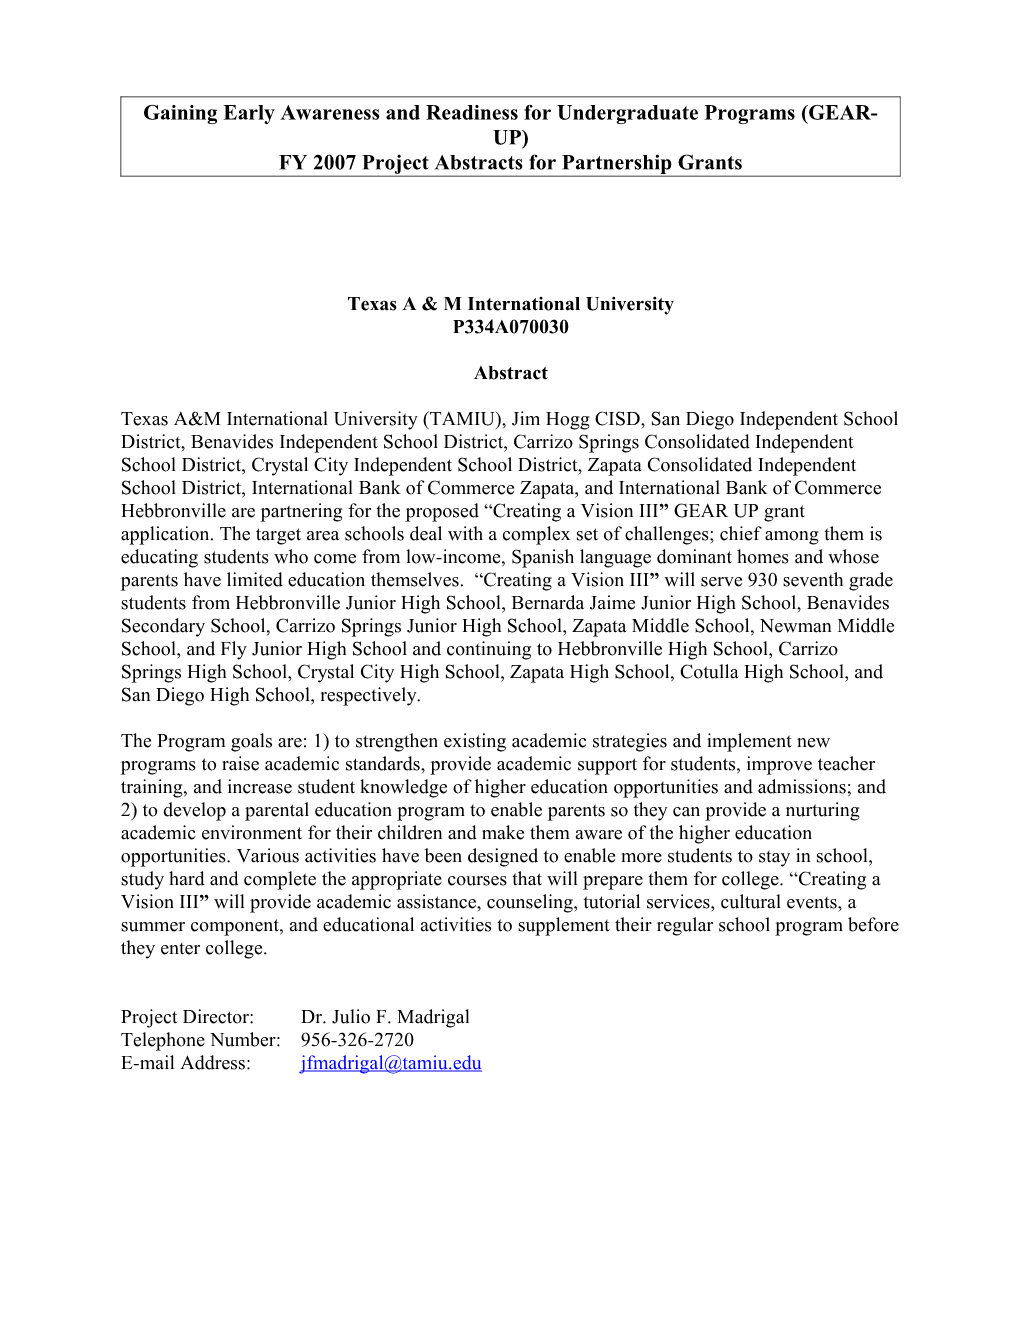 FY 2007 Project Abstracts for GEAR up Partnership Grants (MS Word)